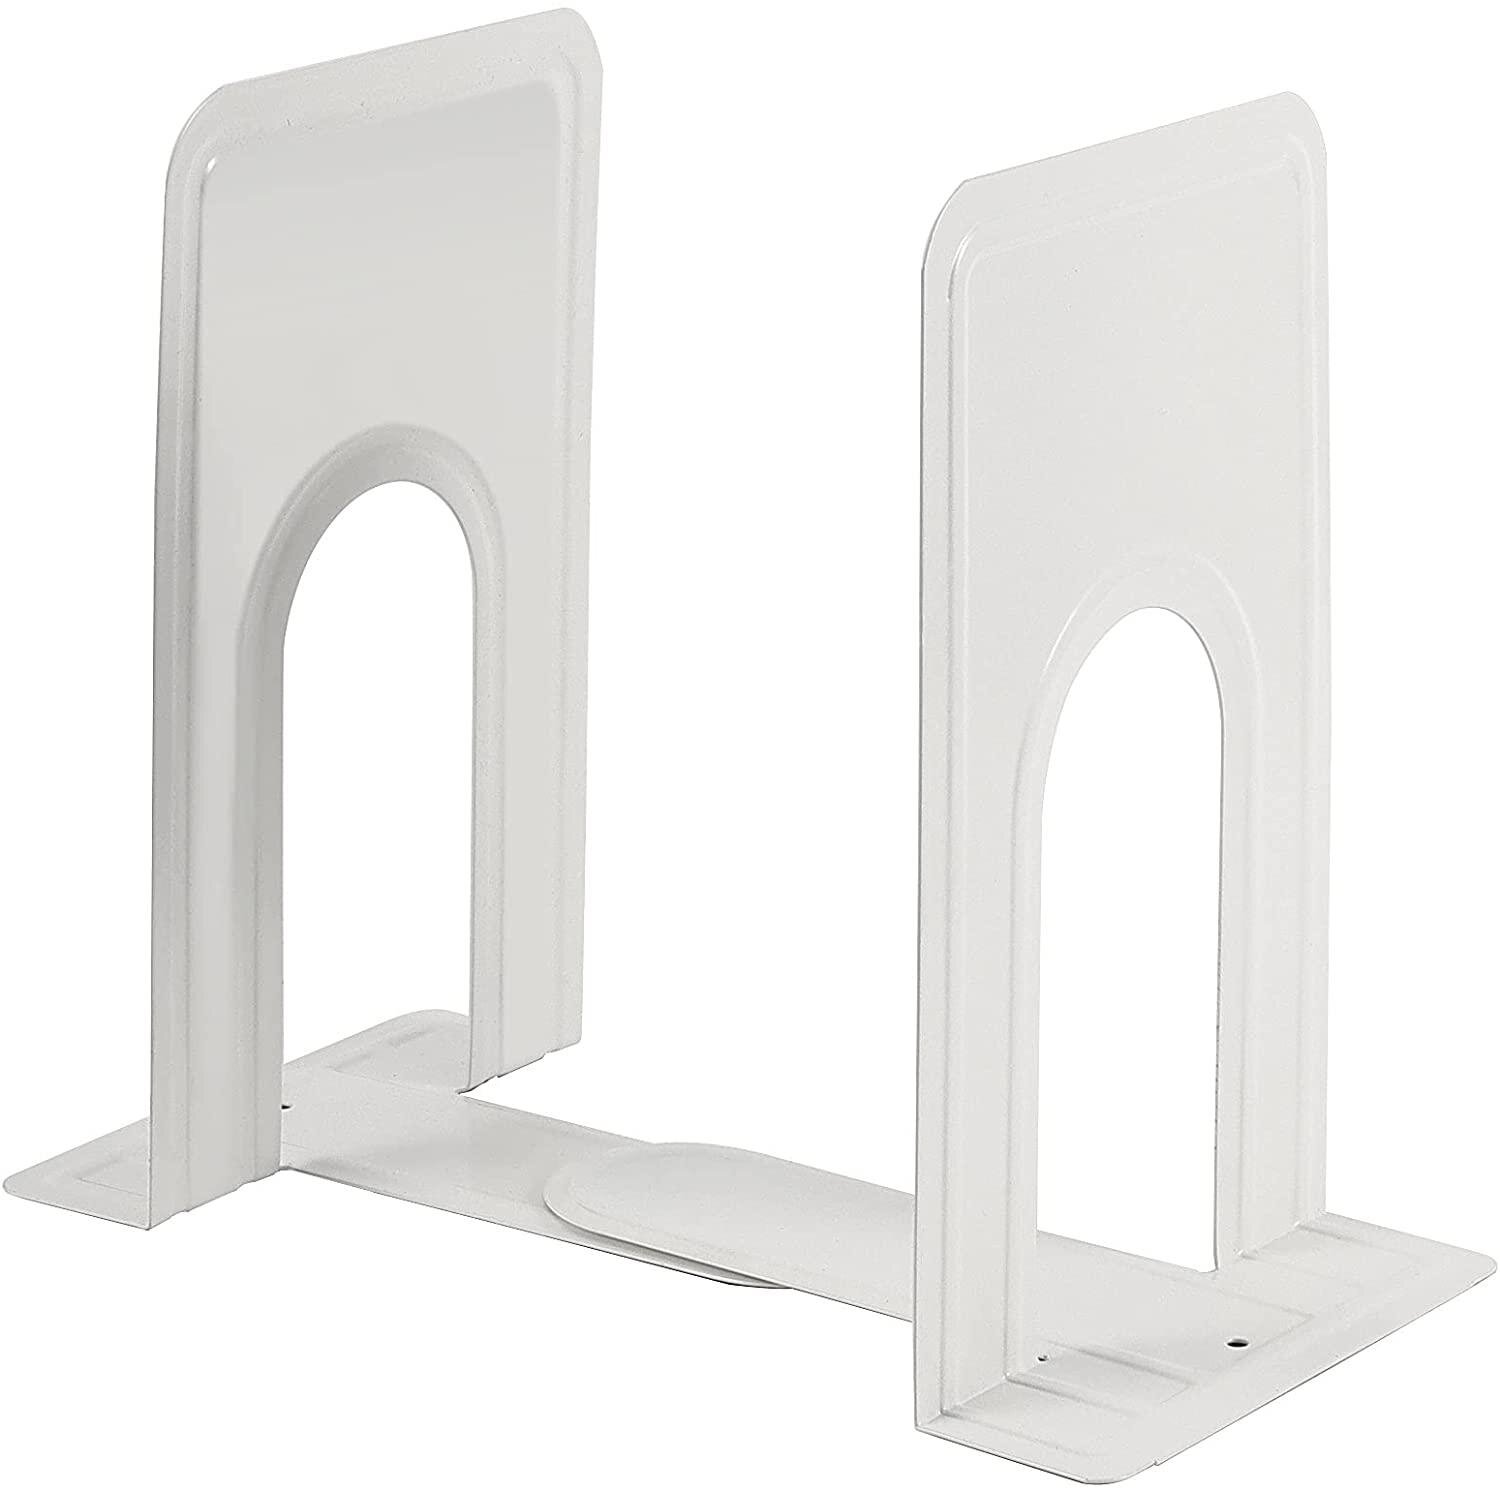 2 Pack Bookends Heavy Duty Books Stand Rack Nonskid Desk Bookshelf Bookcase Metal Book Holder Frame Book Support for Office School Library Magazine Files Binders Movies Dvds Video Games,Standard 